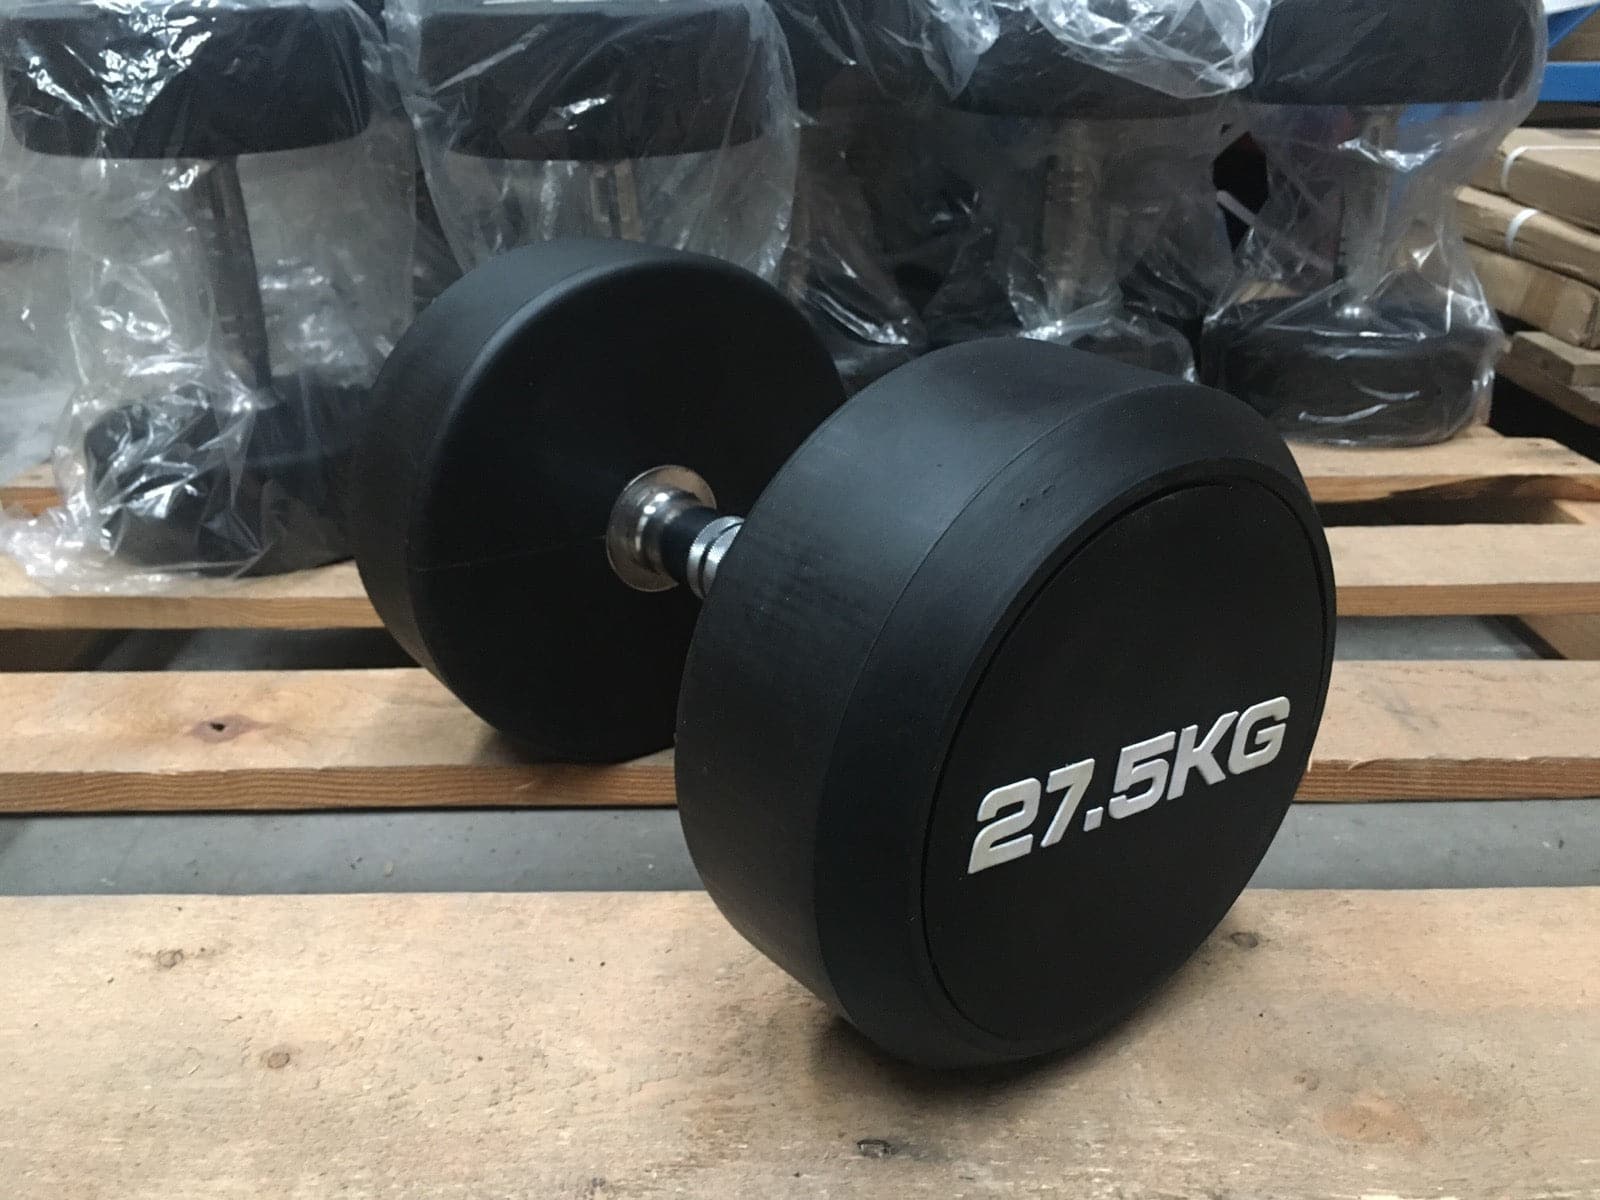 LIQUIDATION SALE - Black PU Rubber-Coated Commercial Dumbbells, Sold in Pairs (Style 2)